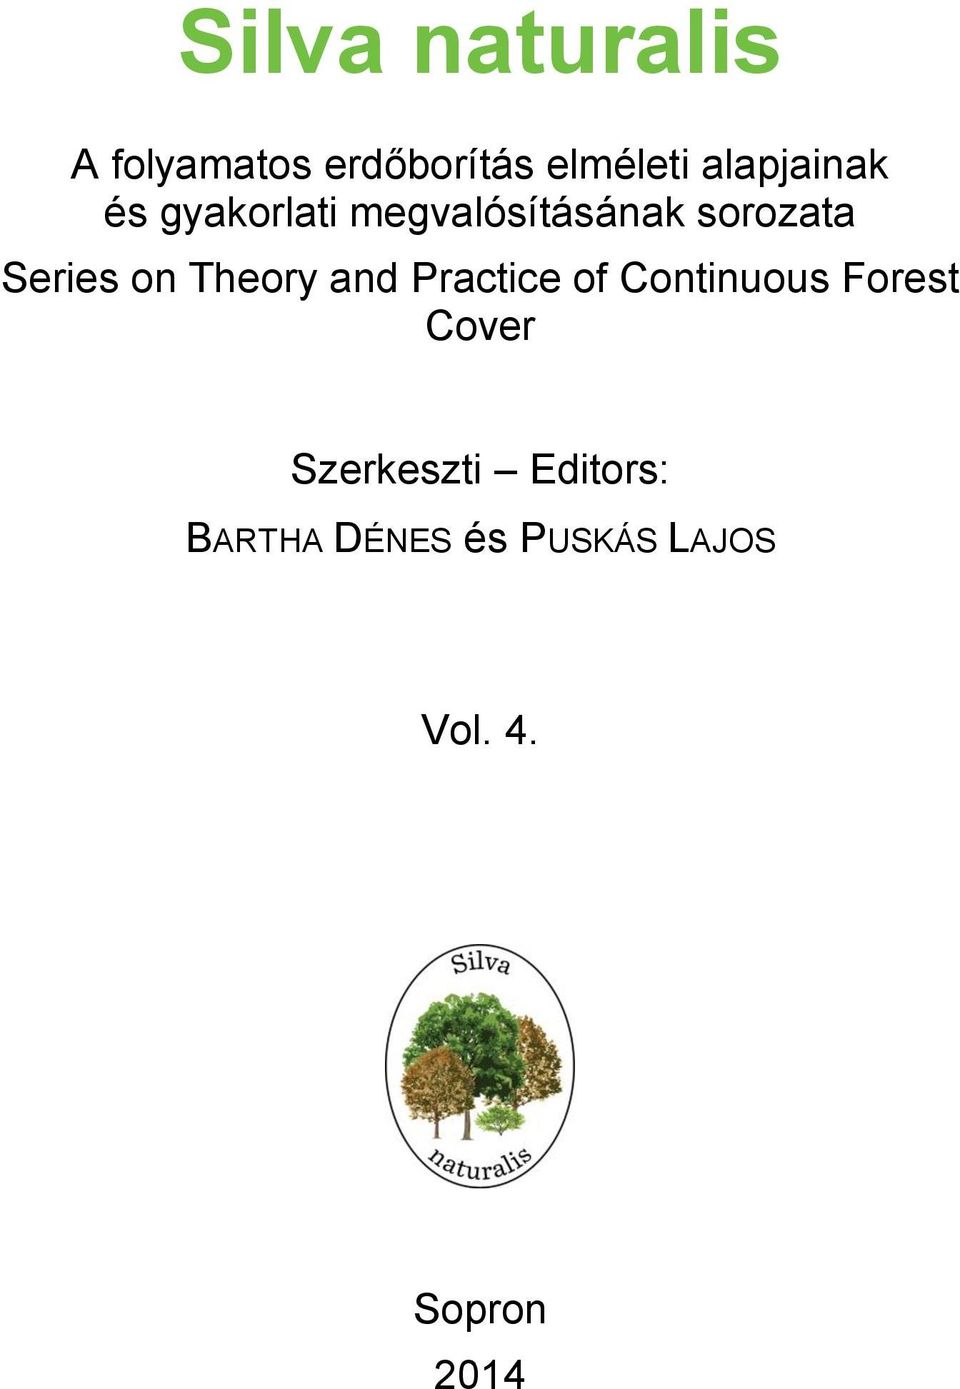 Series on Theory and Practice of Continuous Forest Cover